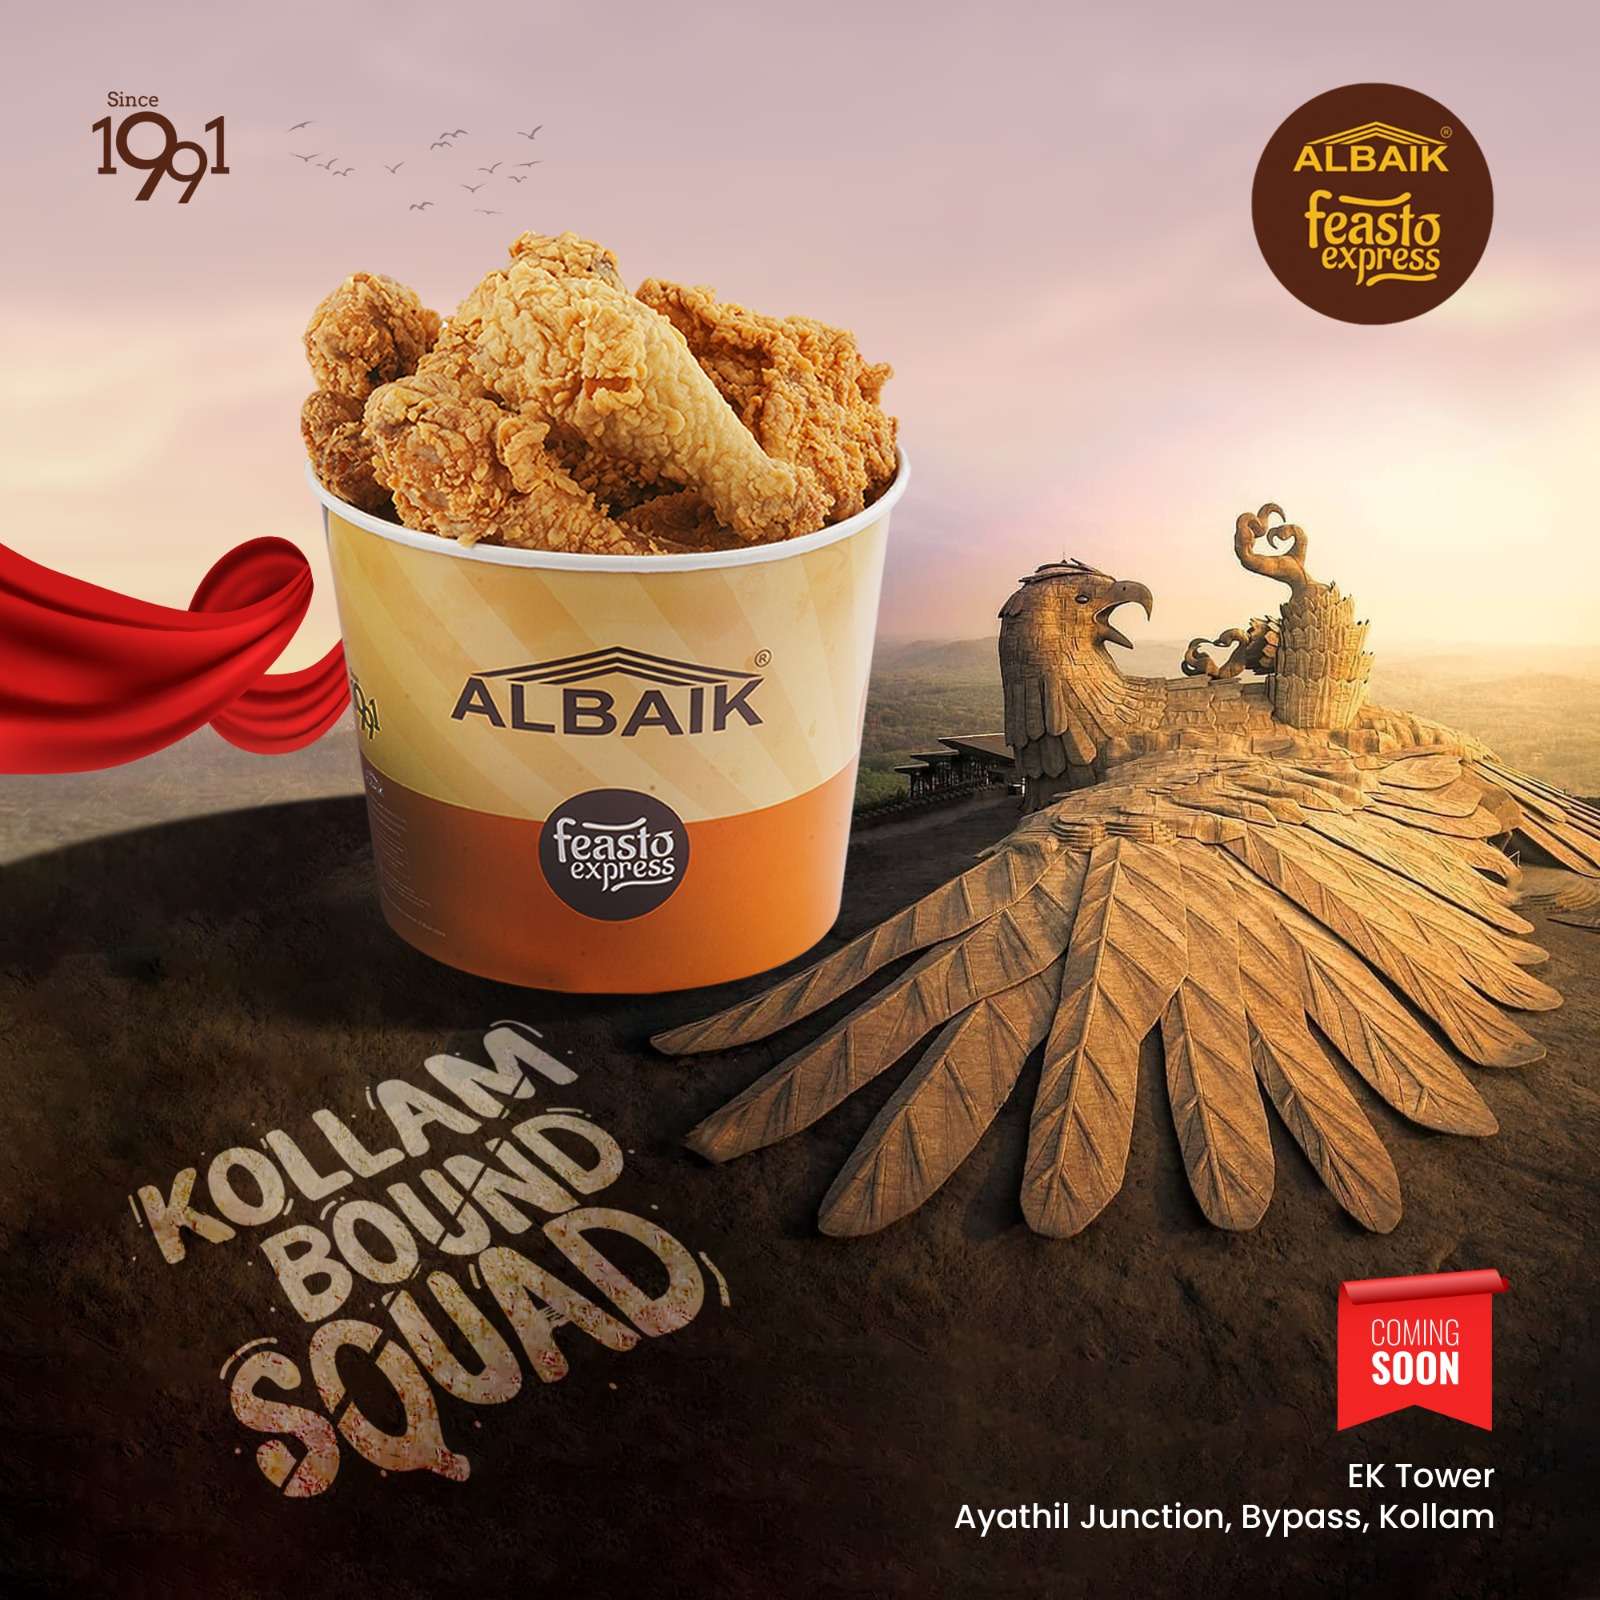 Our new Albaik® outlet opening soon @kollam